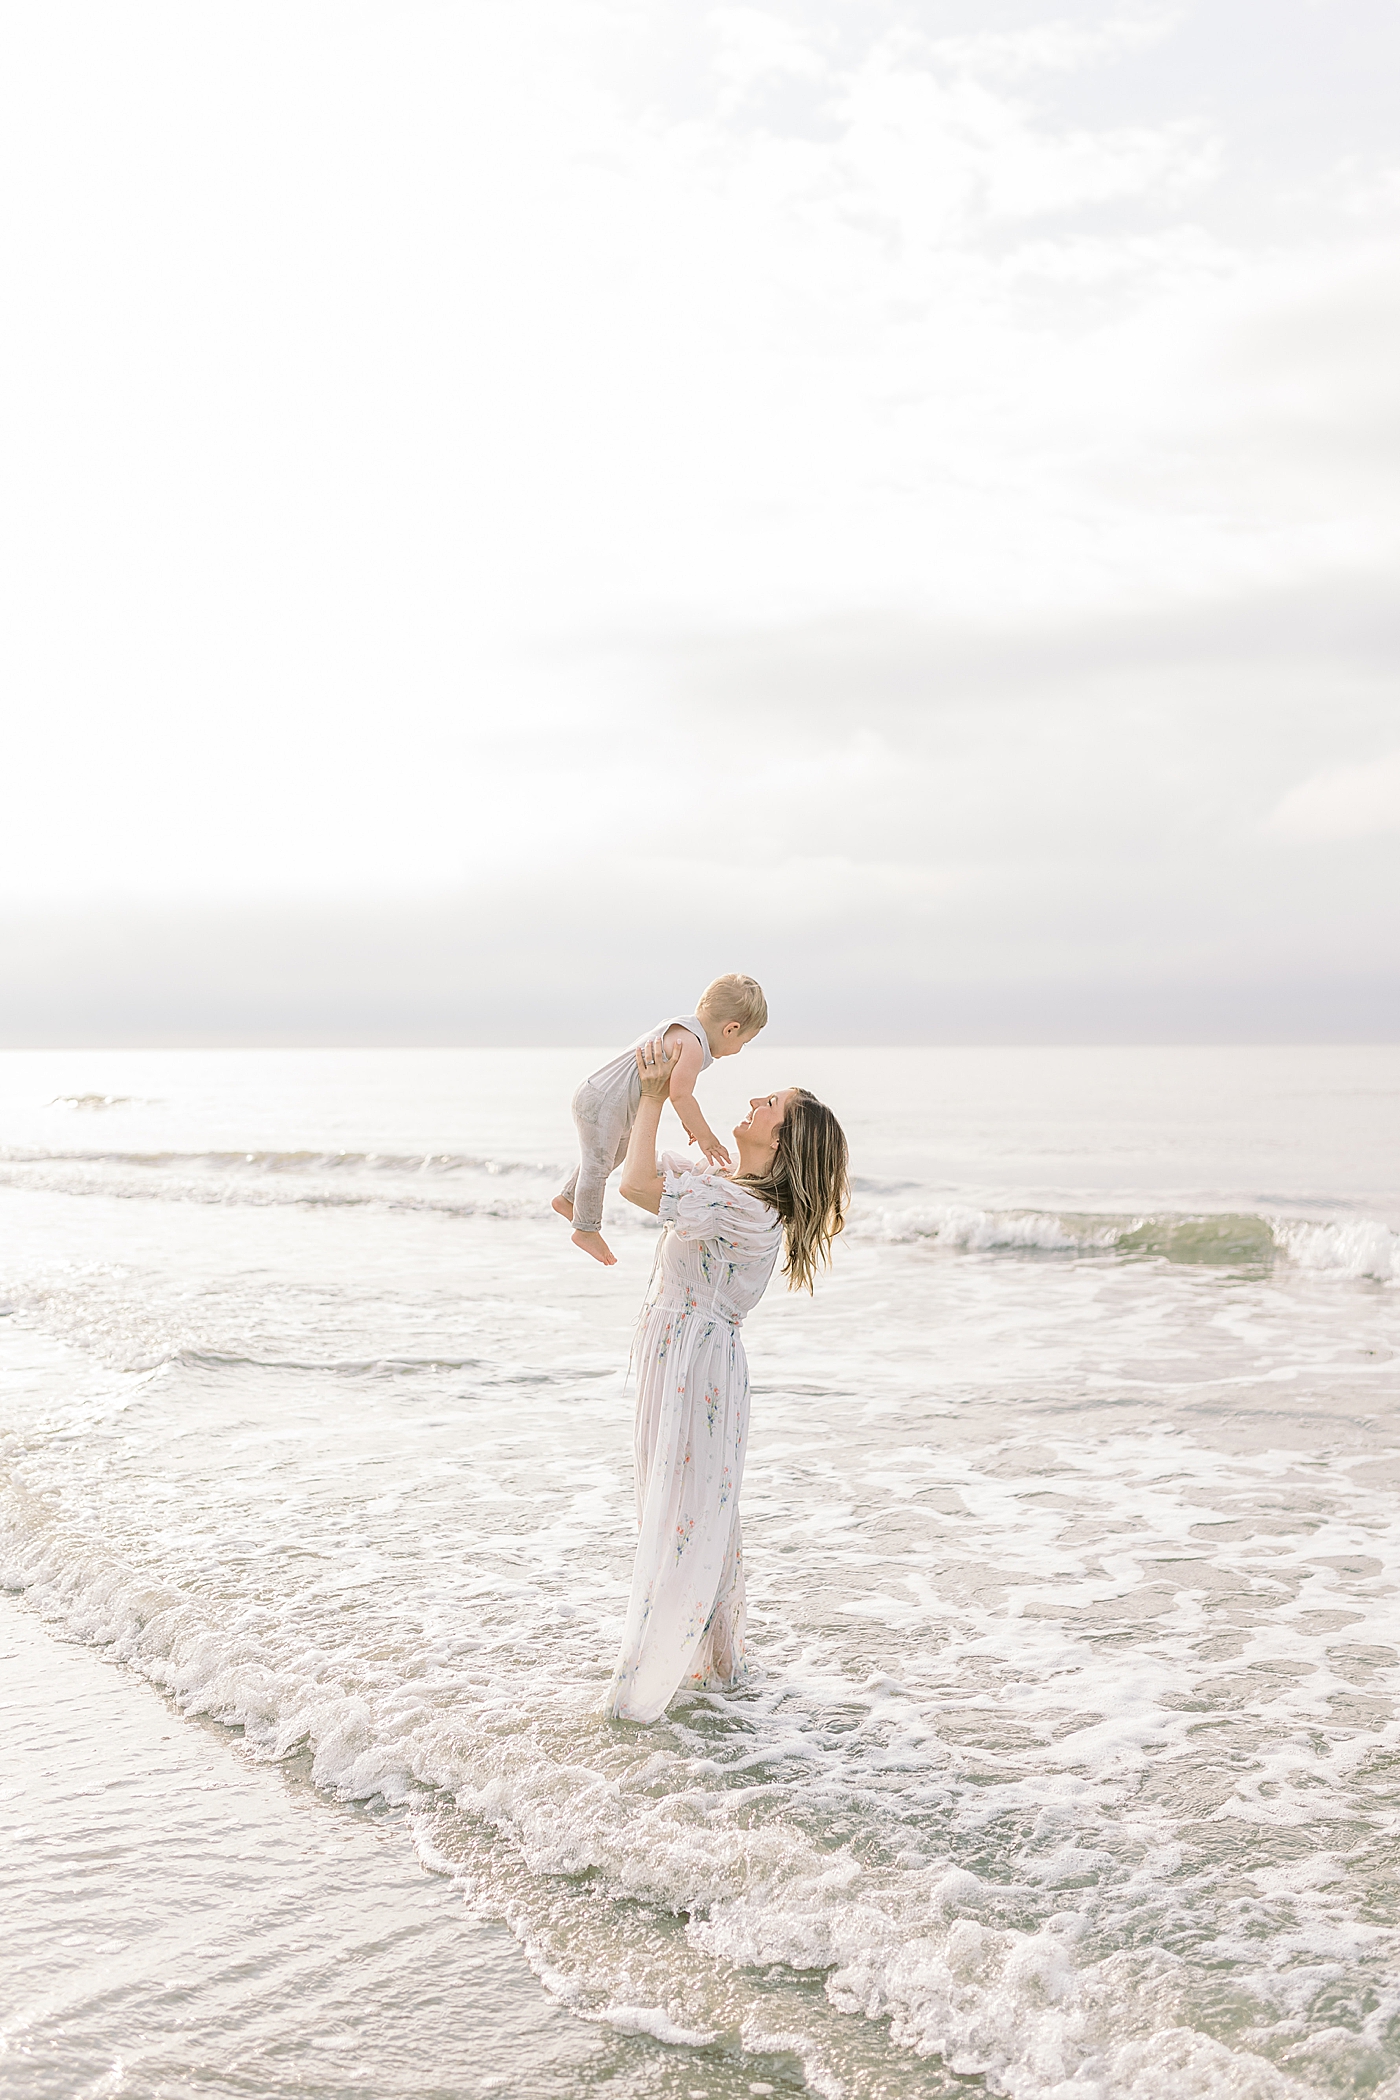 Mom standing in the ocean holding her baby boy | Preparing for Family Beach Session with Caitlyn Motycka